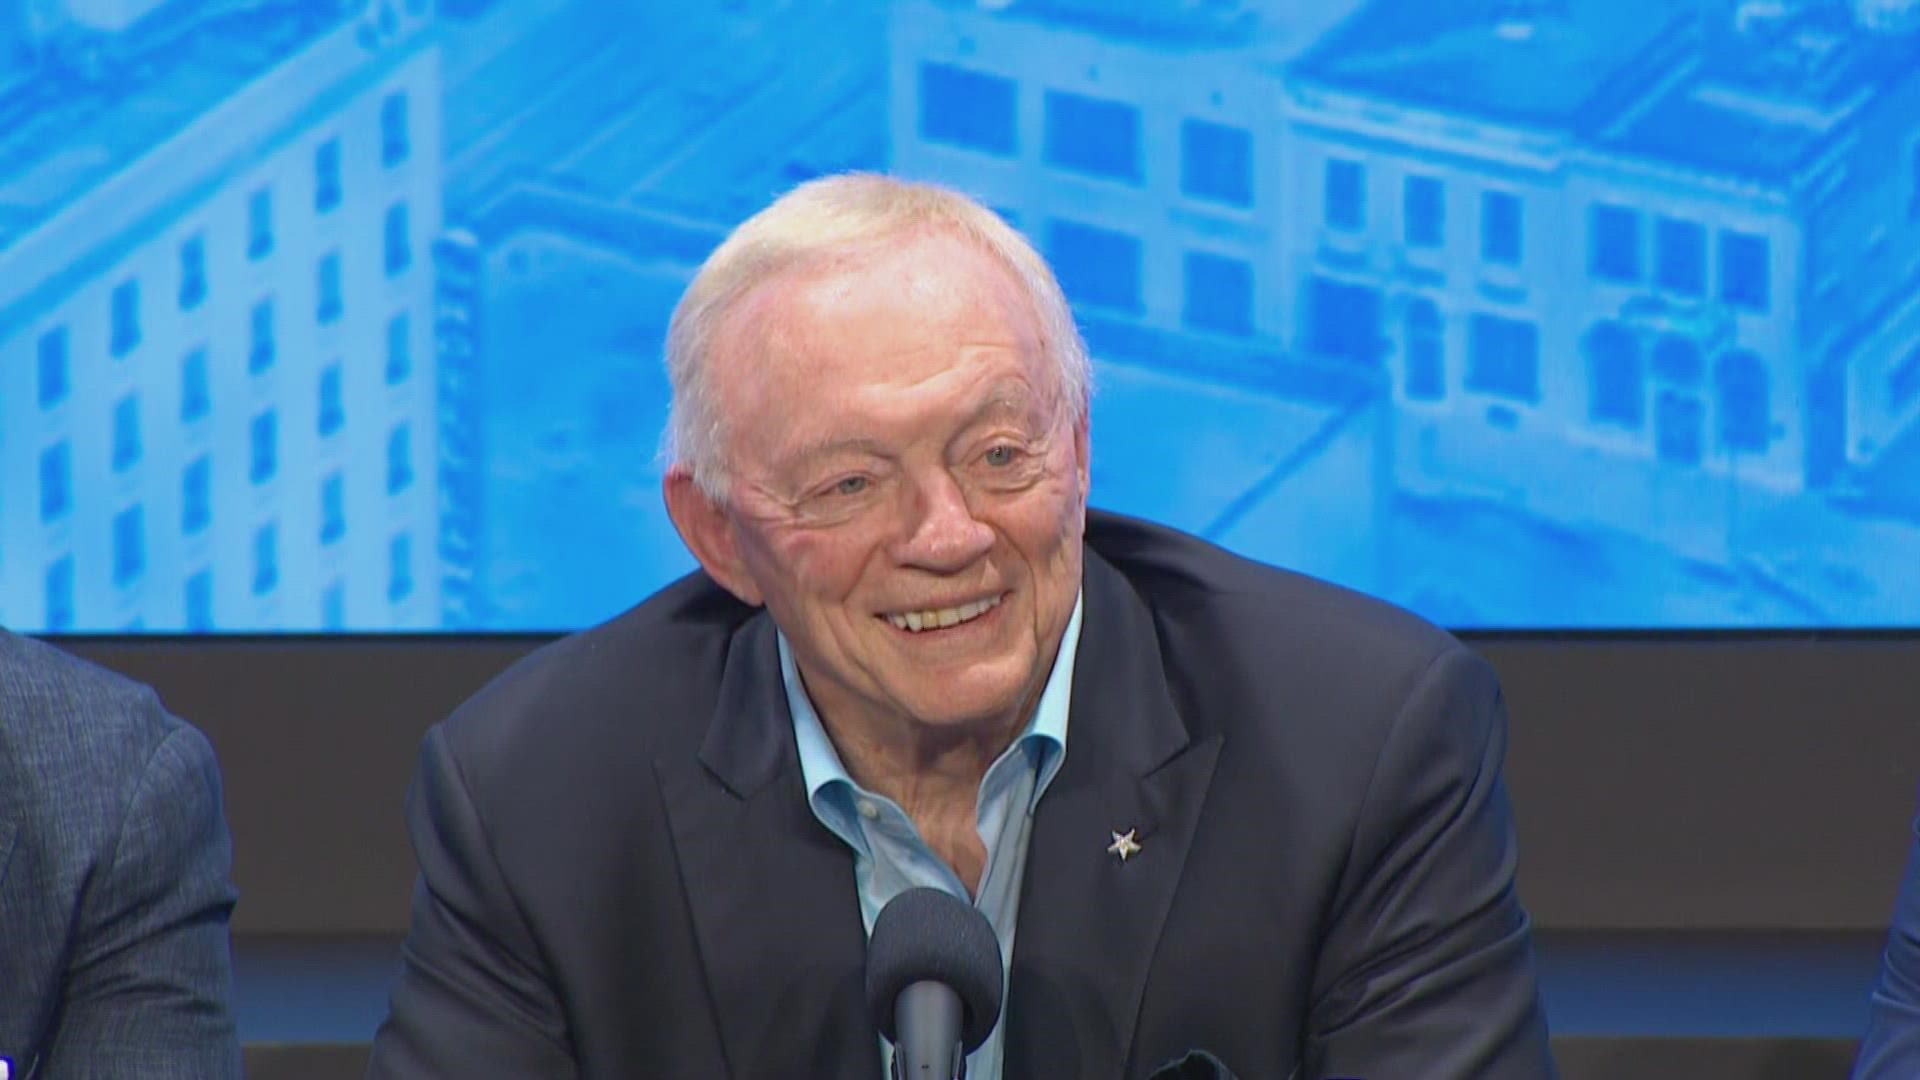 Cowboys owner Jerry Jones says events like a World Cup game were considered when AT&T Stadium was designed and built.